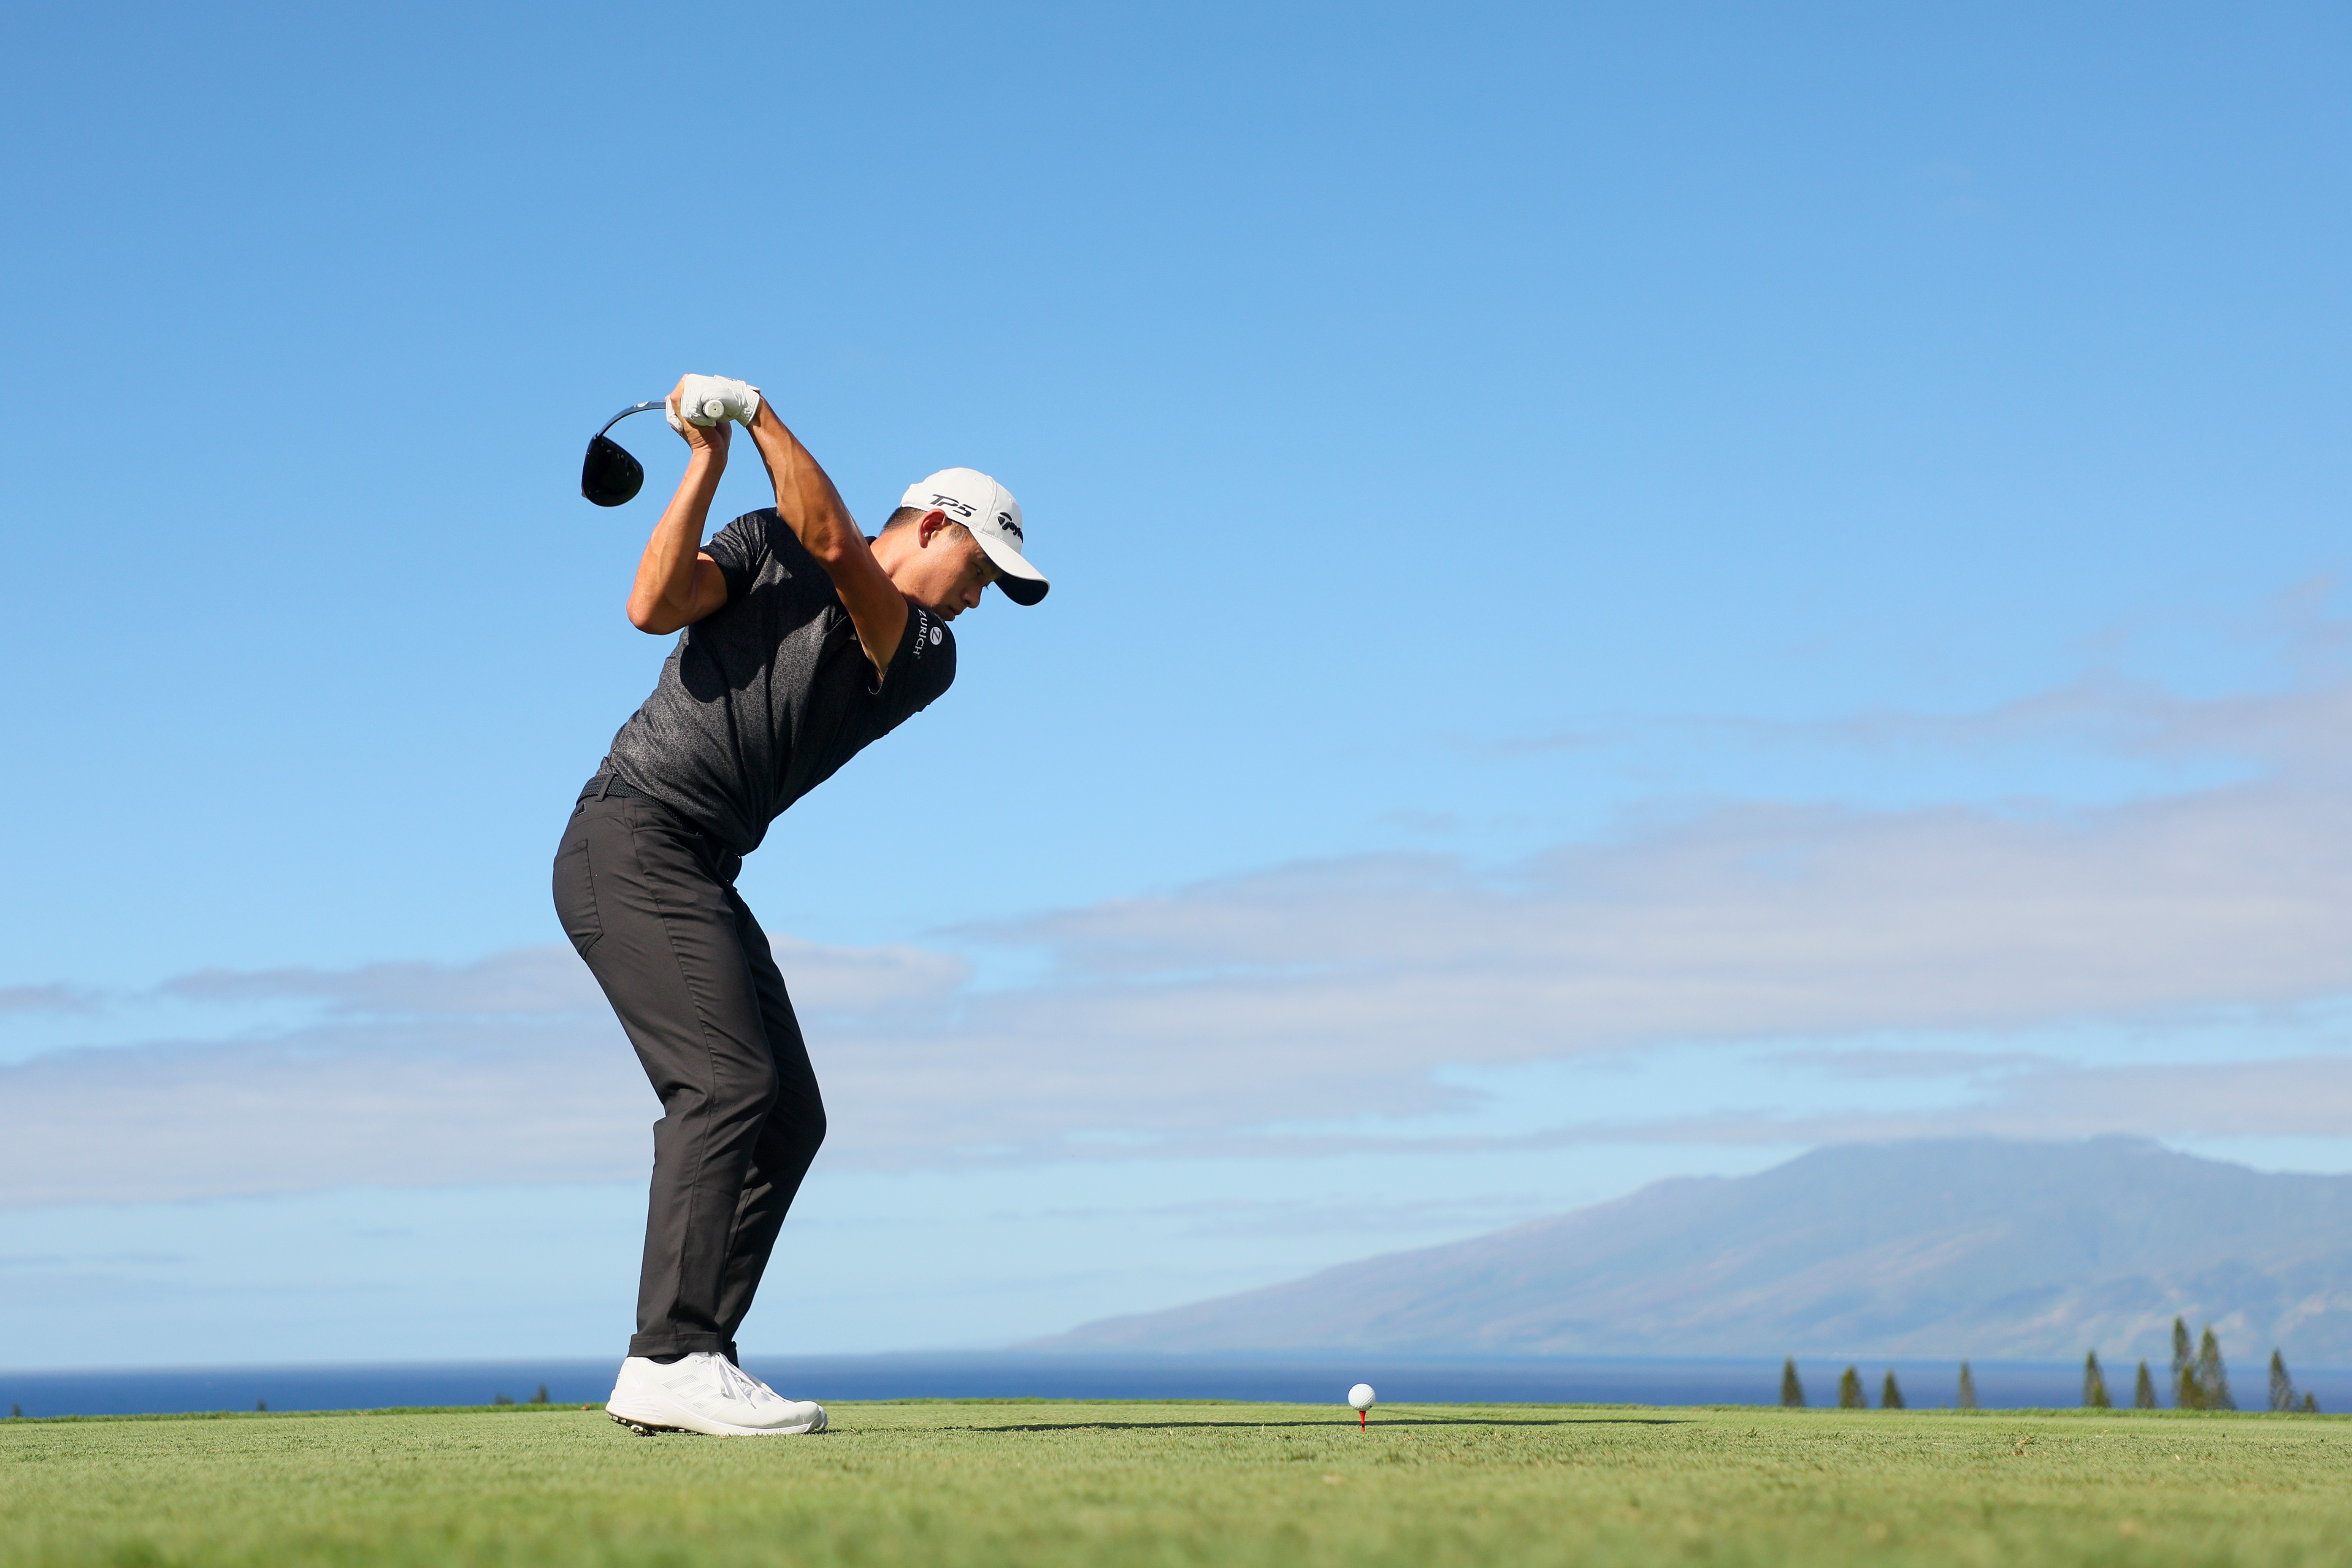 How Far Should One Stand from a Golf Ball? - SportsRec